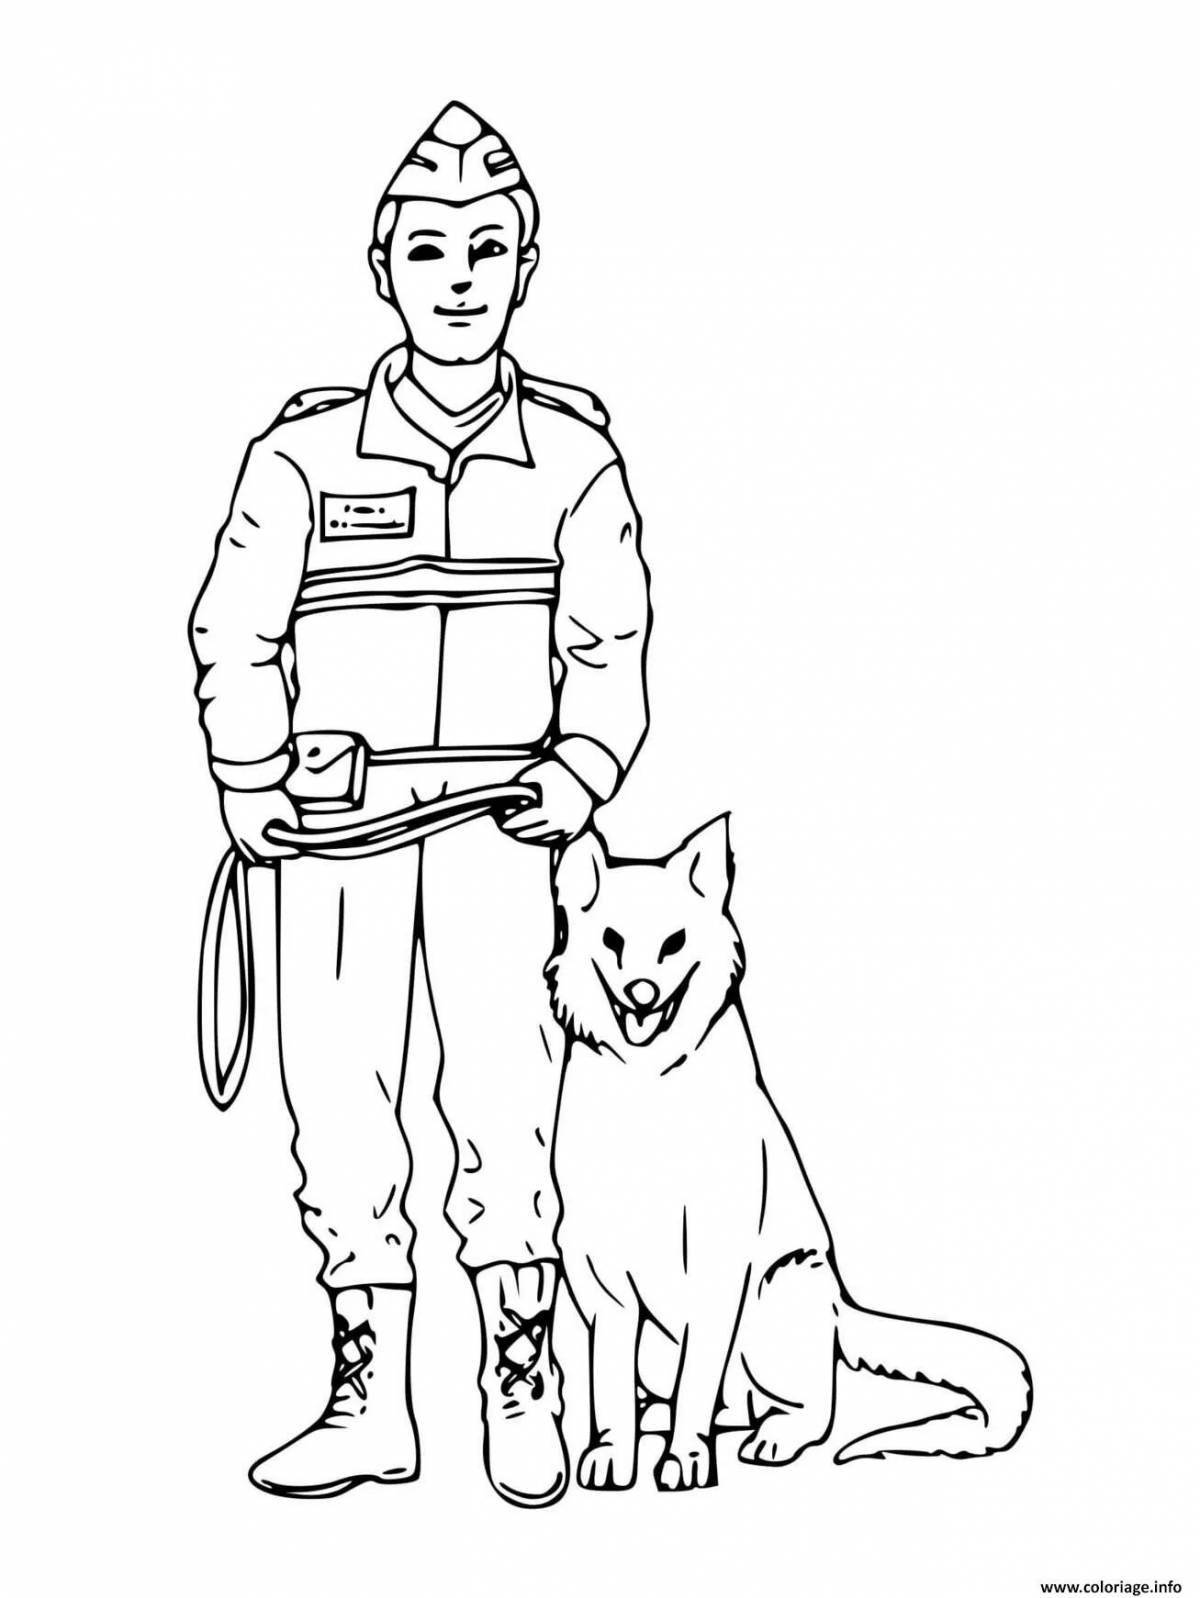 Mysterious soldier with dog coloring book